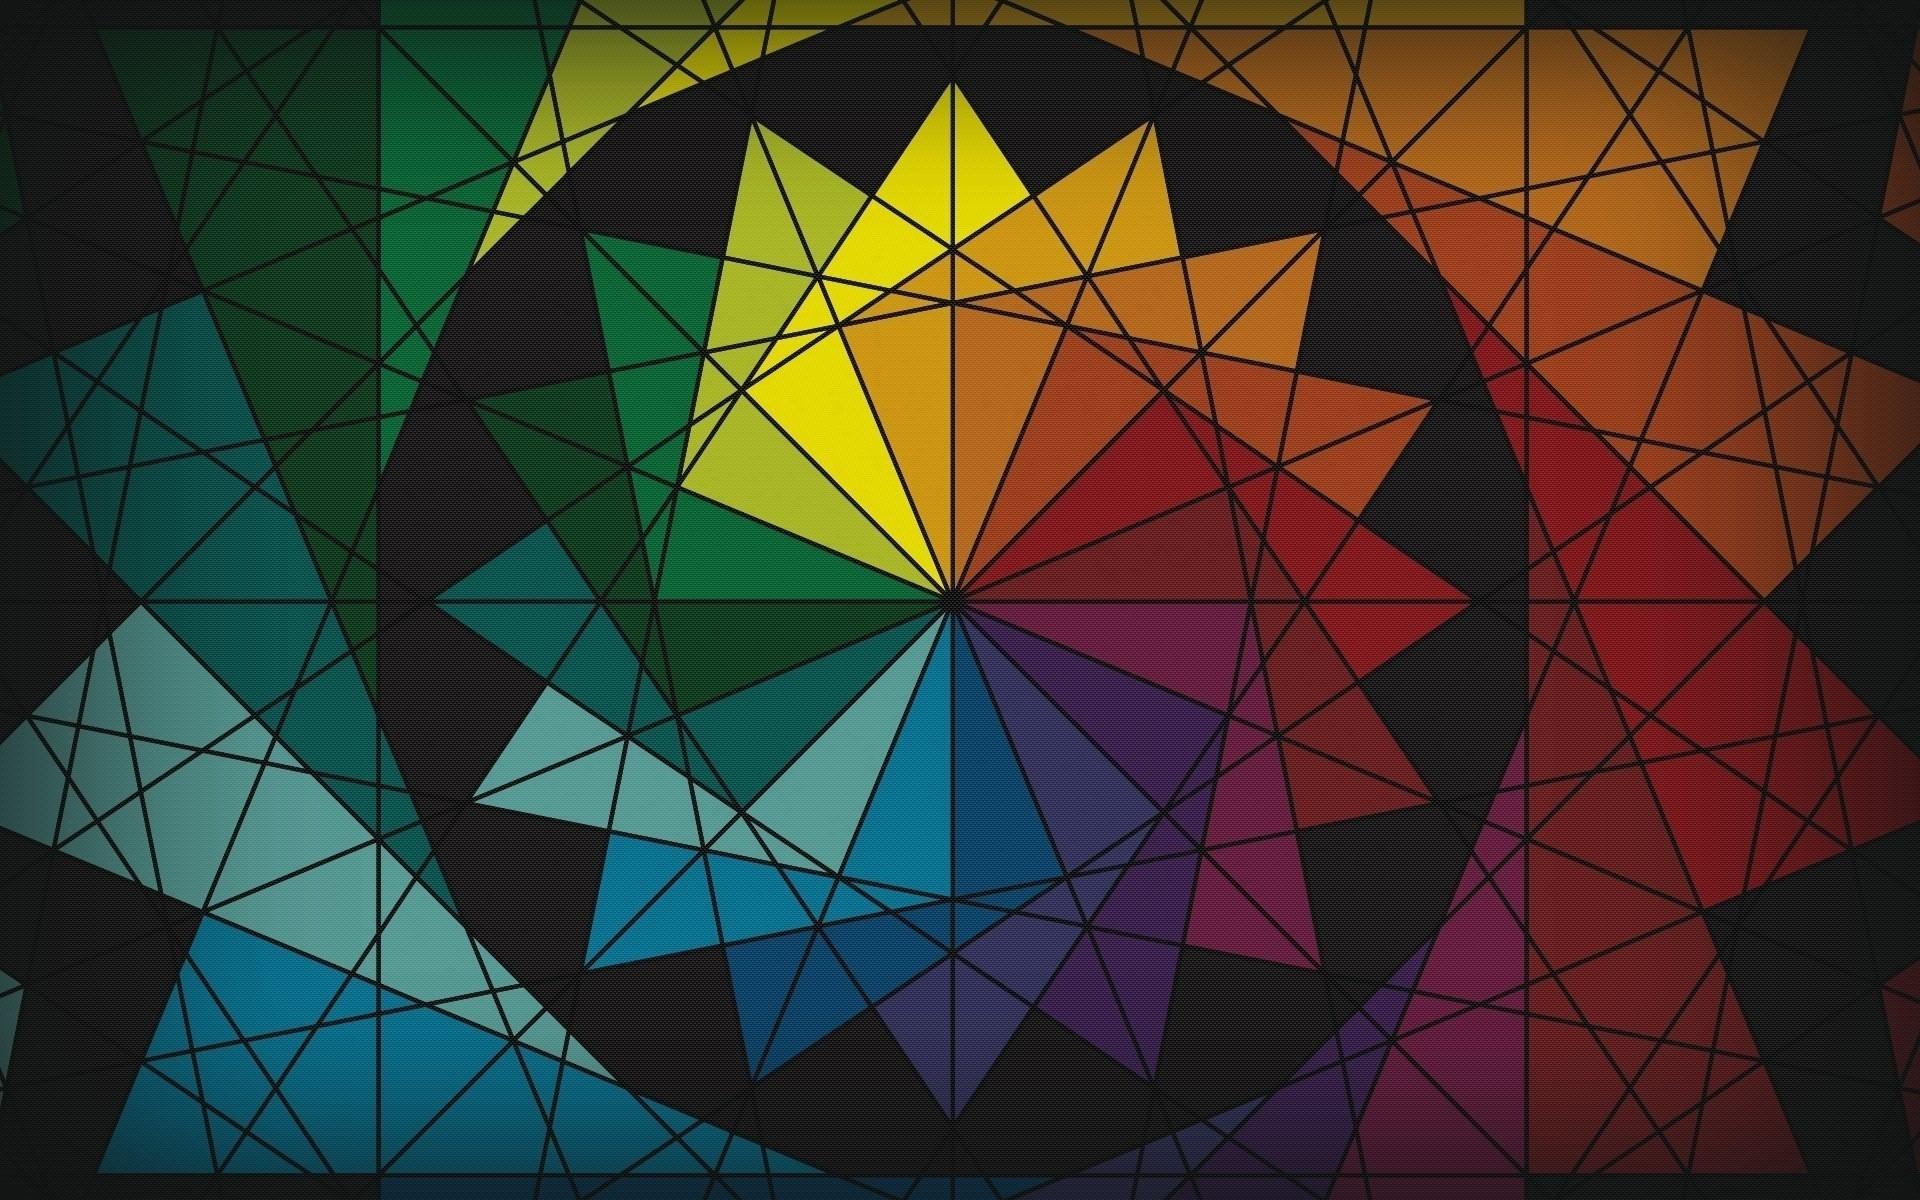 #color wheel, #colorful, #triangle, #circle, #abstract